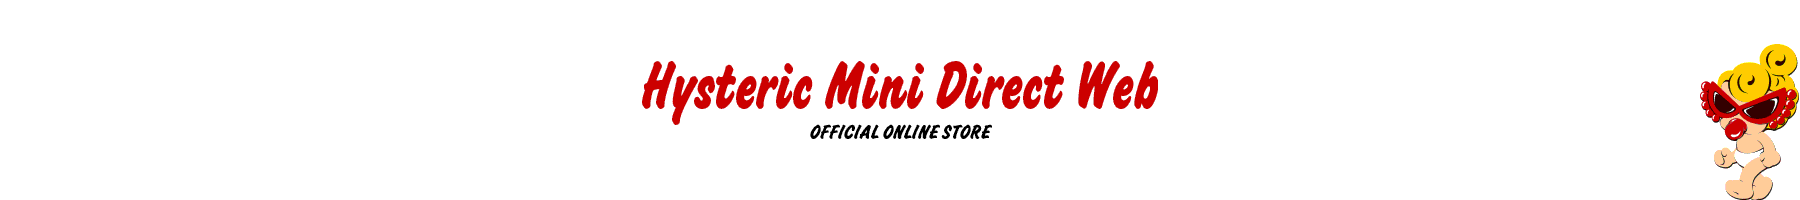 HYSTERIC MINI DIRECT WEB OFFICIAL ONLINE STORE